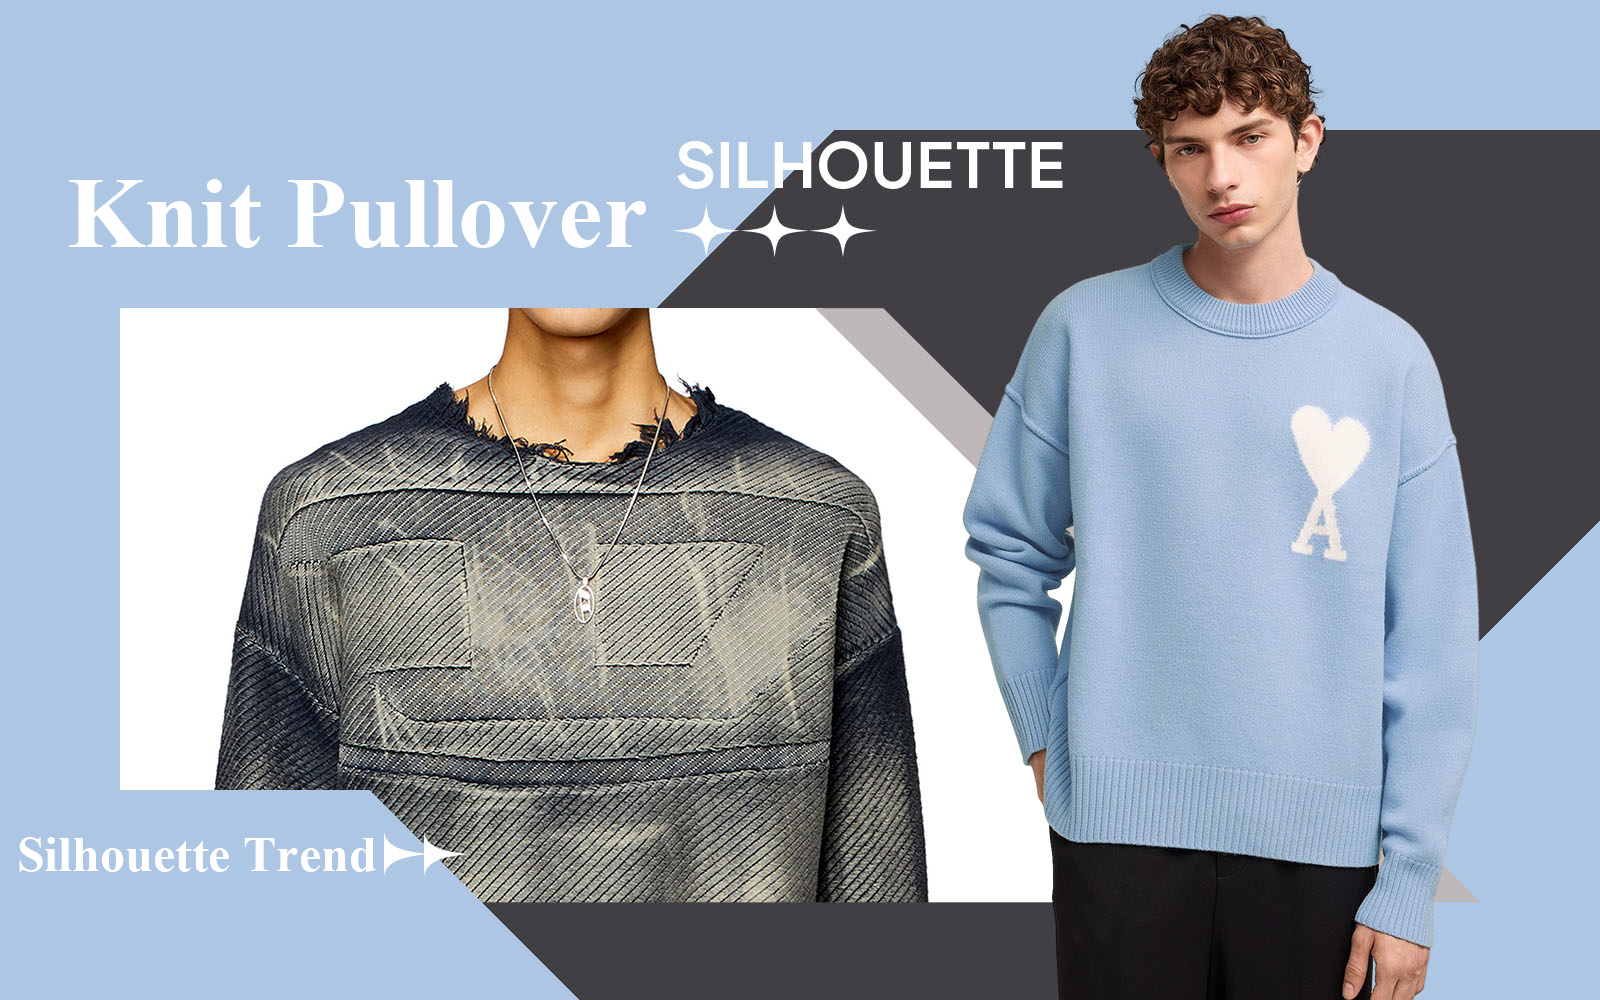 Smart Casual -- The Silhouette Trend for Men's Knit Pullover